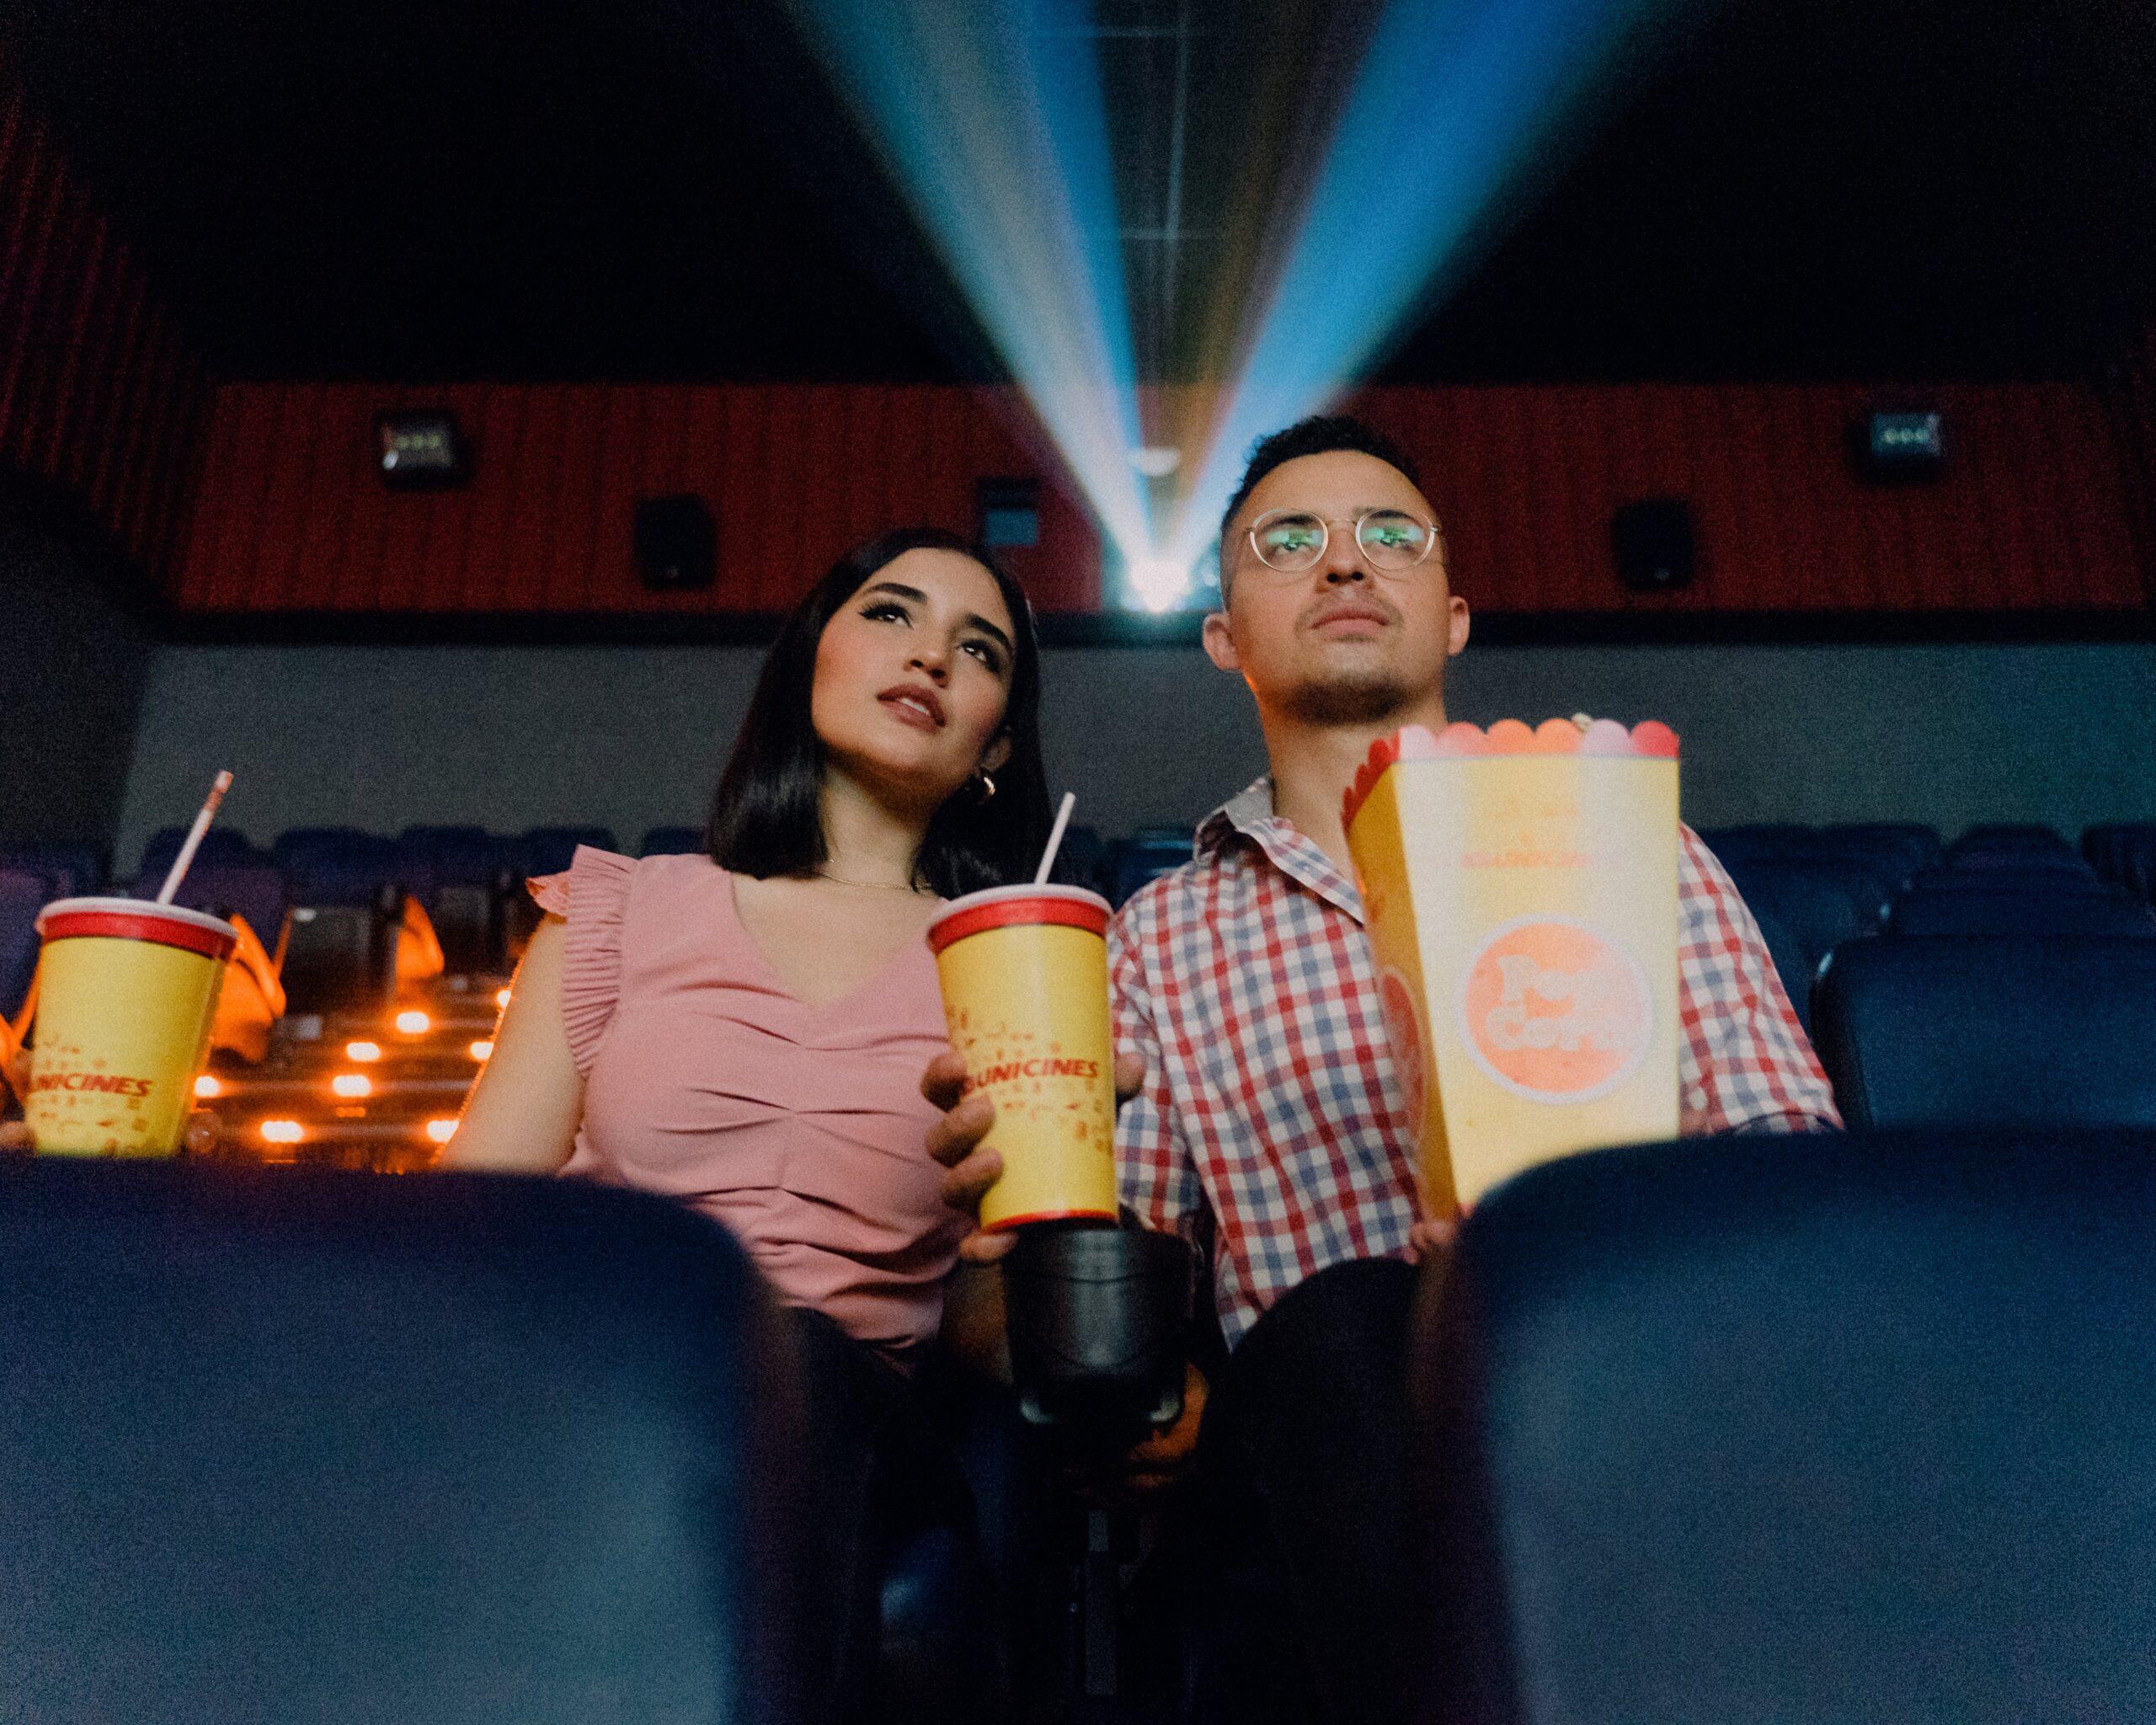 A young couple are at the theatre. The projector light passes overhead, as the two stare over the camera. A drink is between them, and a bag of popcorn and another drink are at their sides. They look slightly disconcerted about something happening on screen.